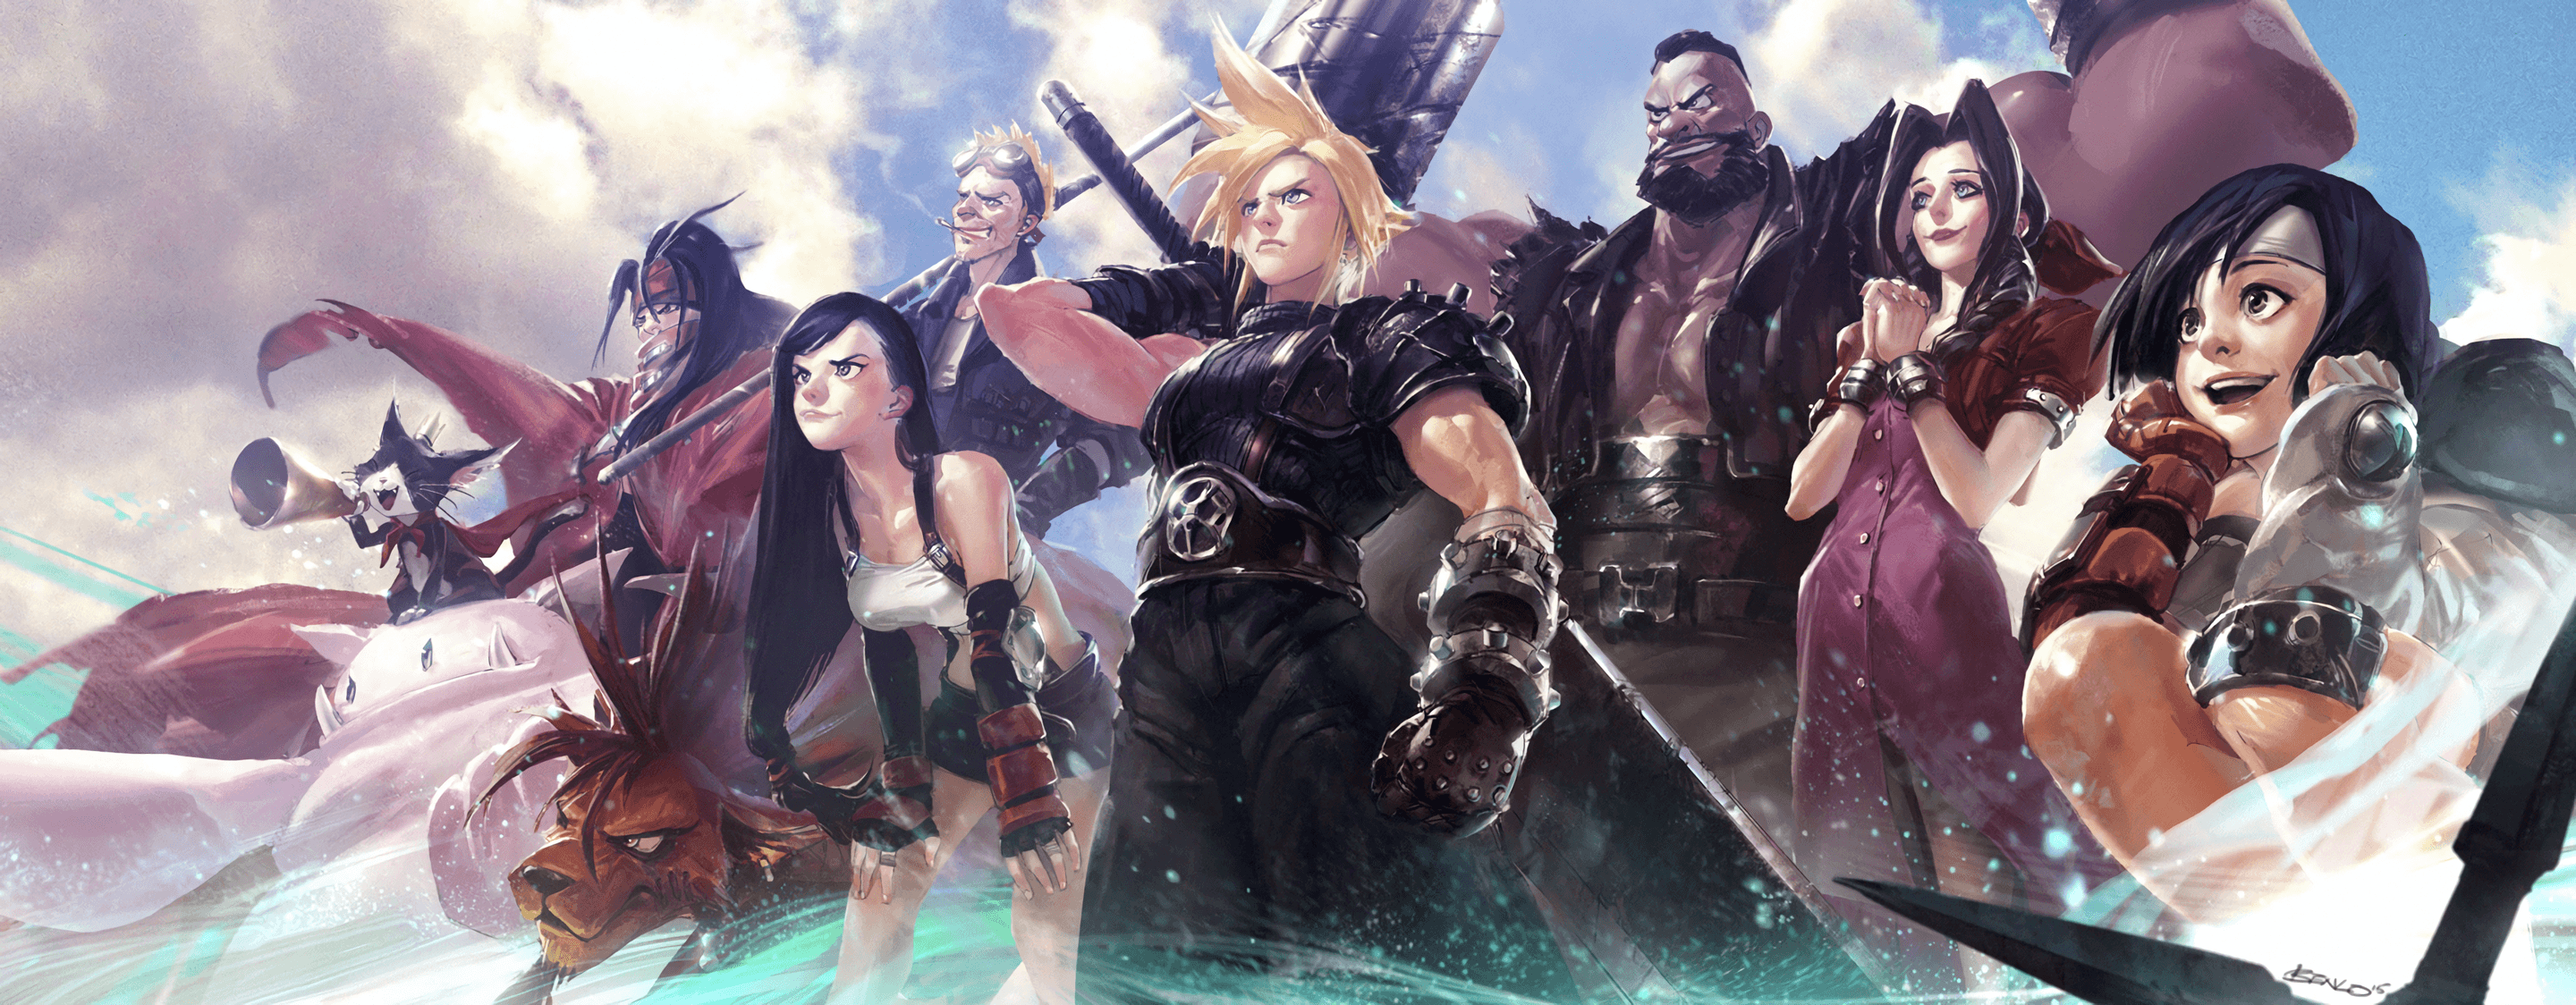 Final Fantasy VII Full HD Wallpaper and Background Imagex1124